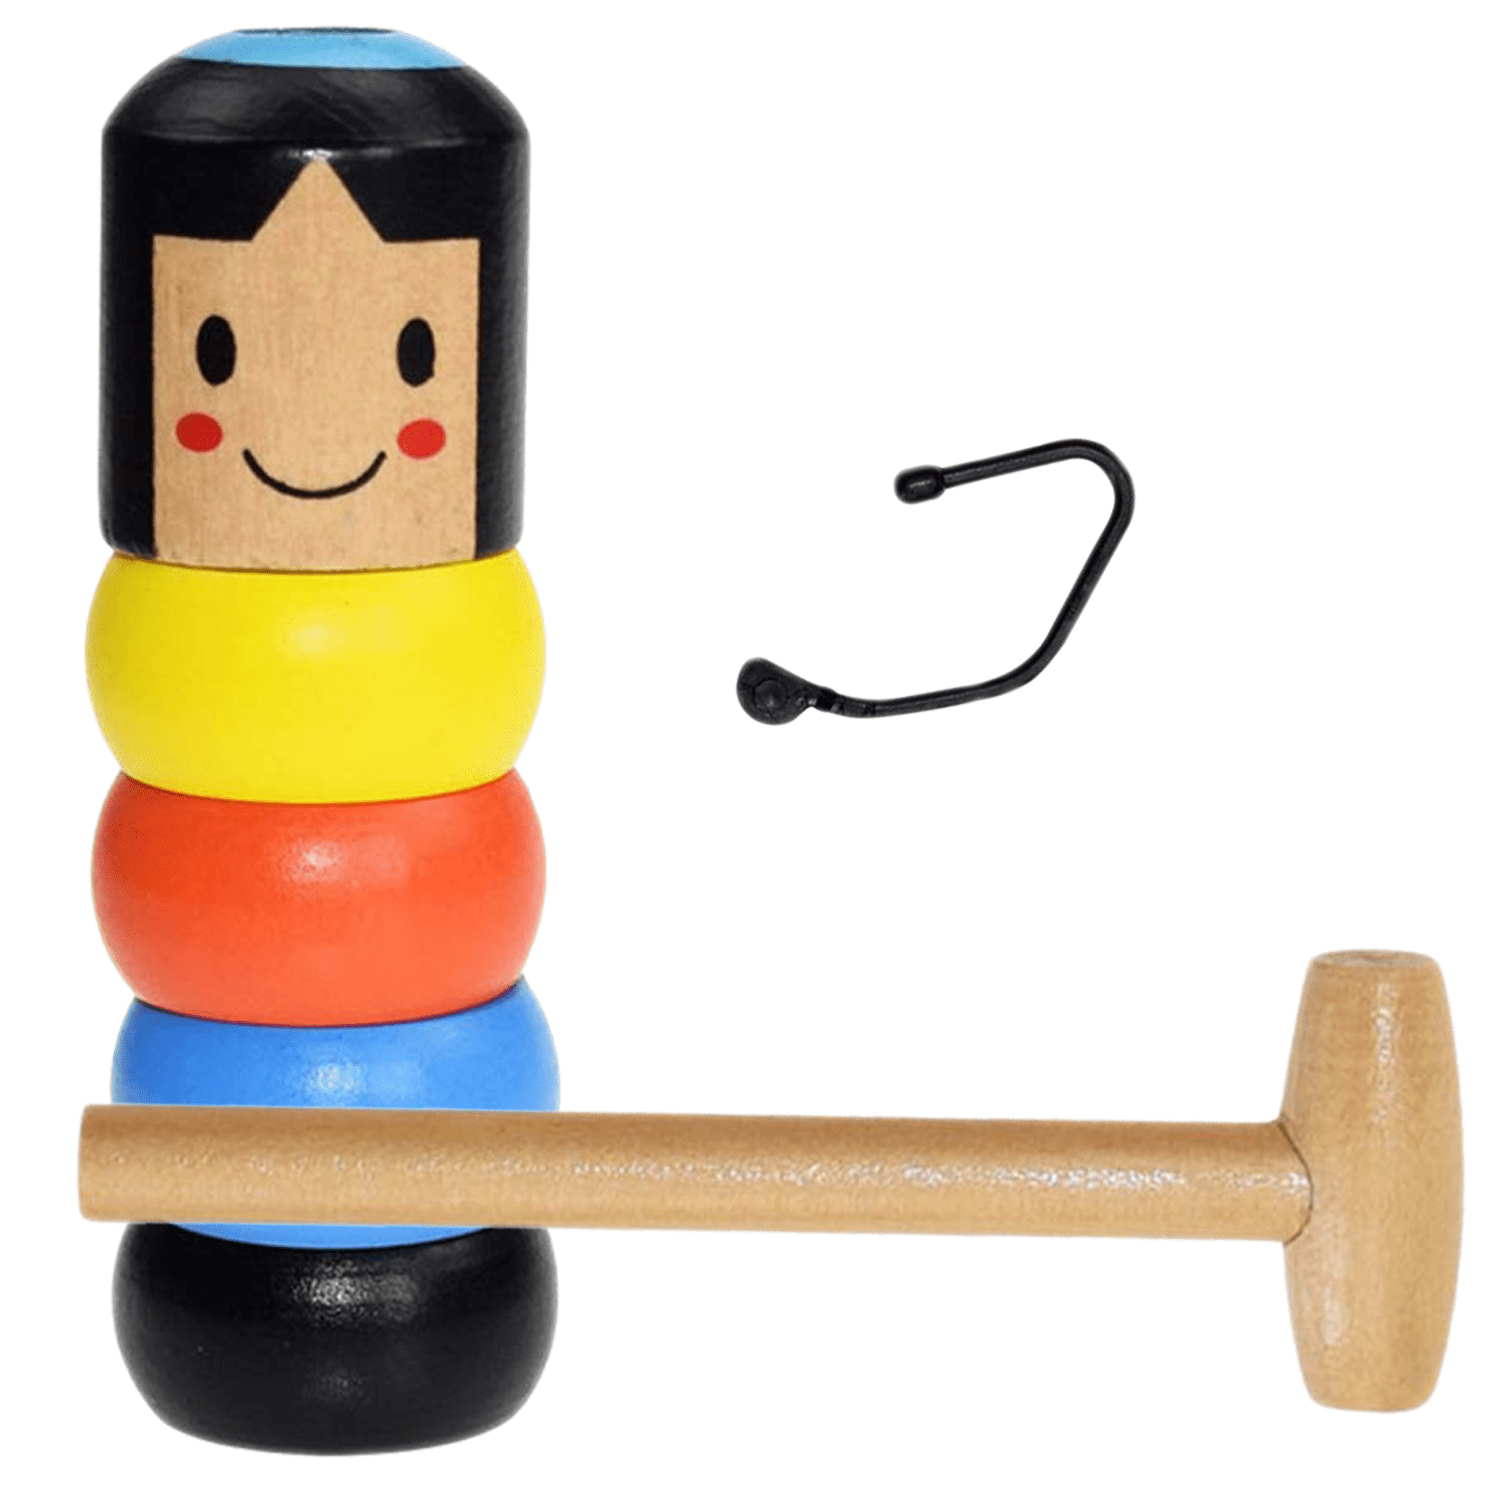 UNBREAKABLE WOODEN MAN MAGIC TOY SMALL WOODEN TOY XMAS PARTY GIFTS KIDS 